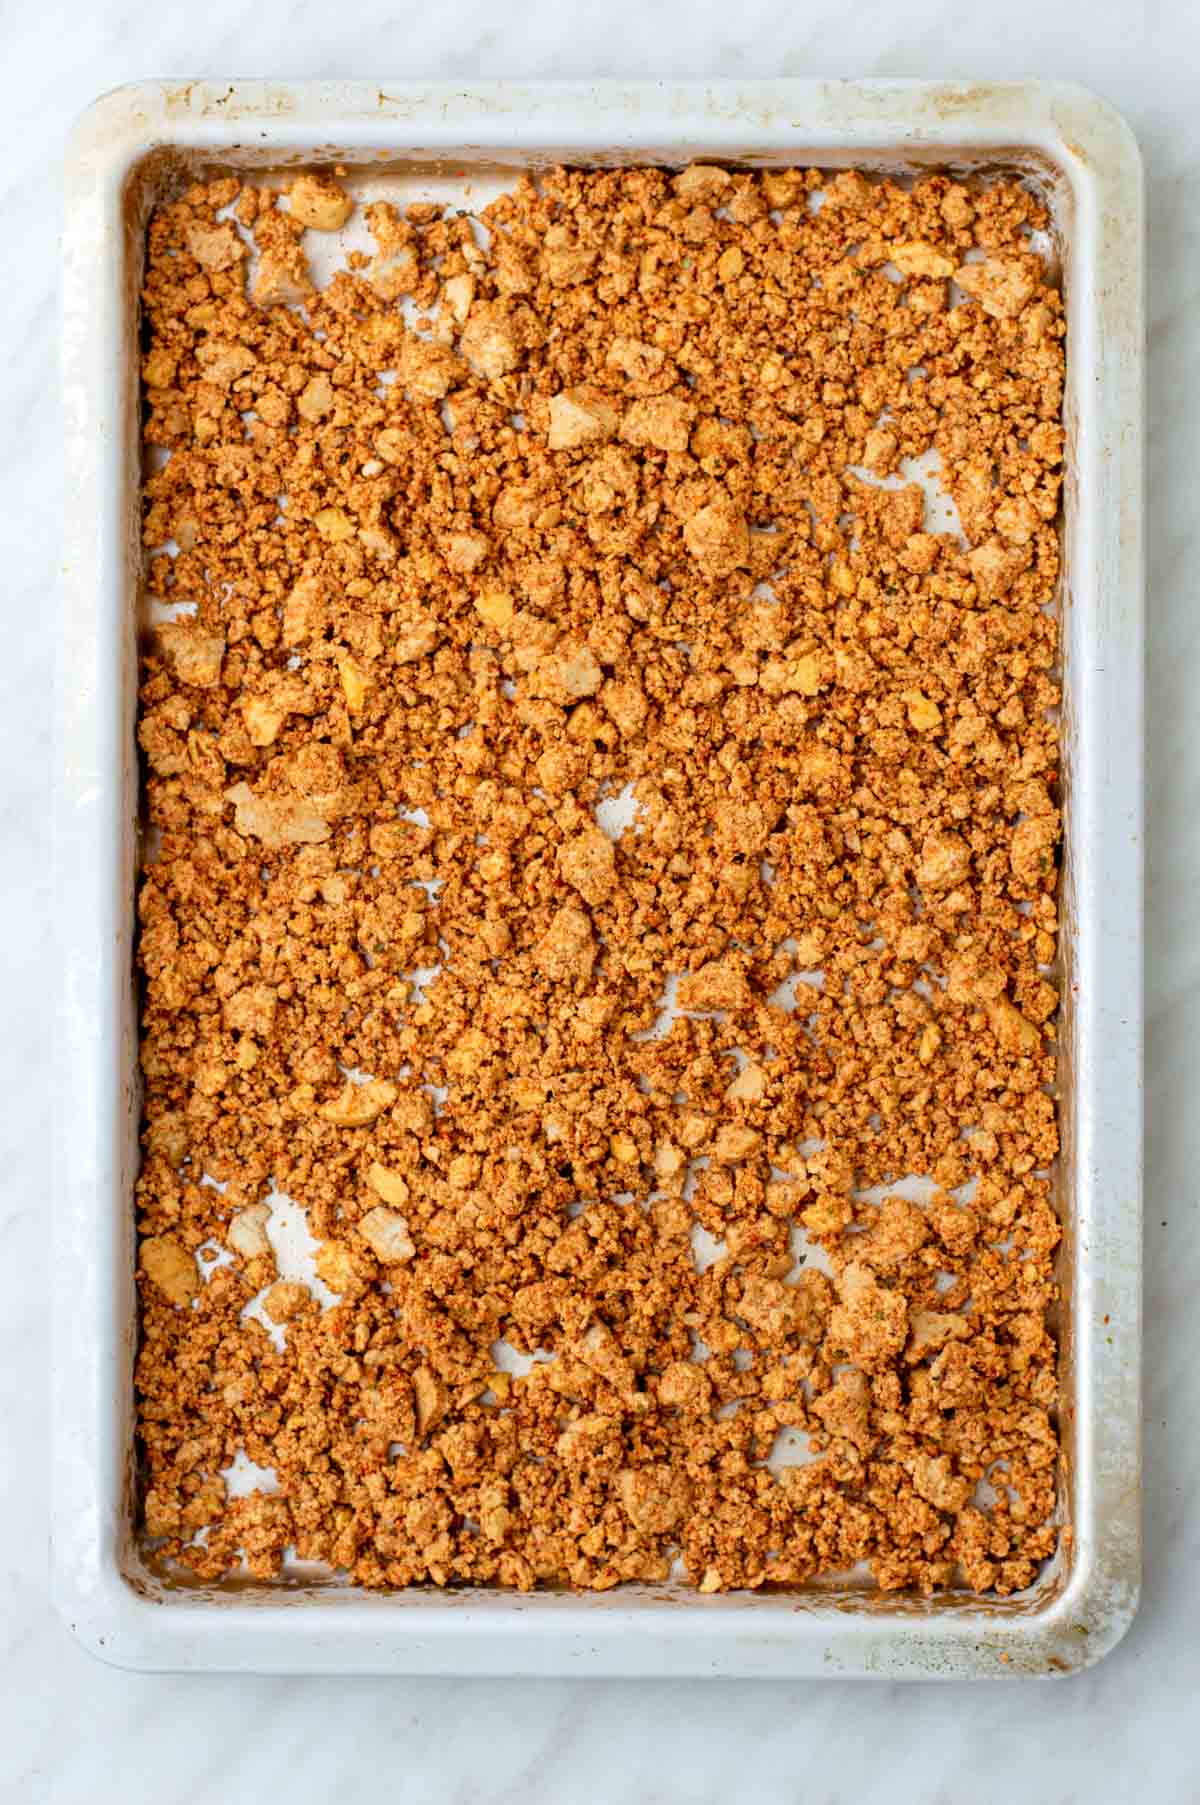 Unbaked tofu crumbles on a baking sheet.